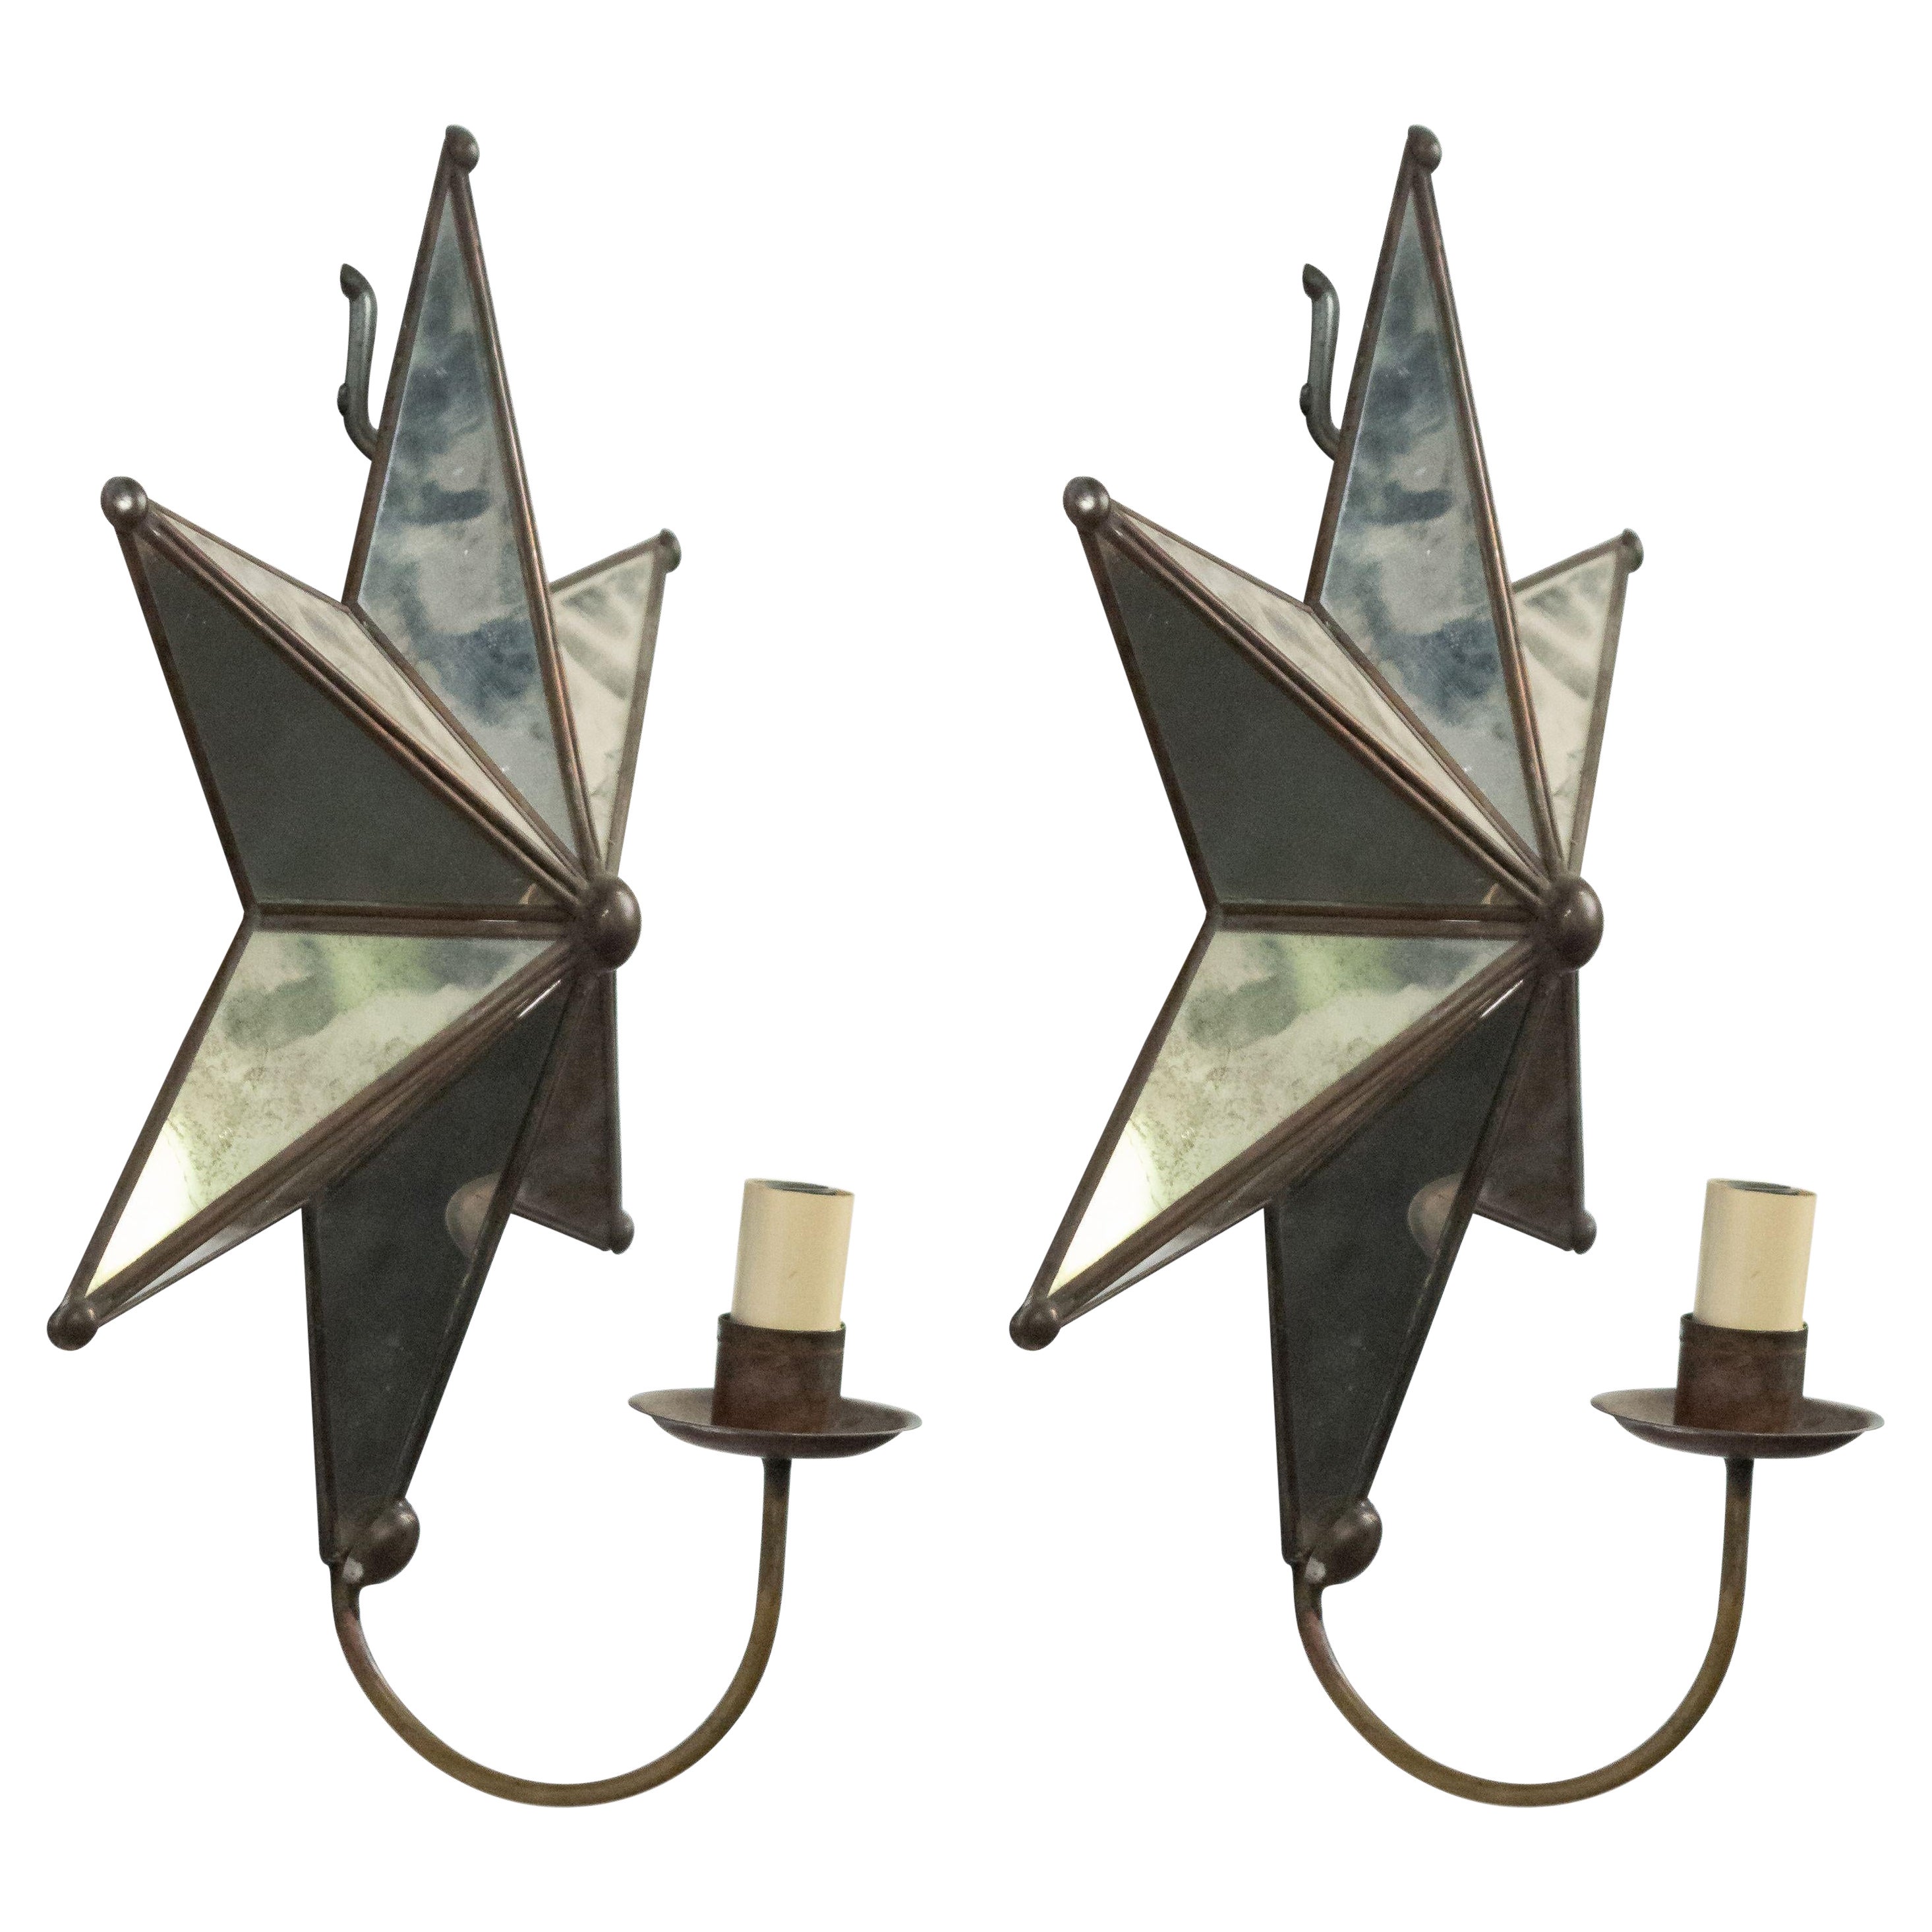 Pair of American Art Moderne Mirrored Star Wall Sconces